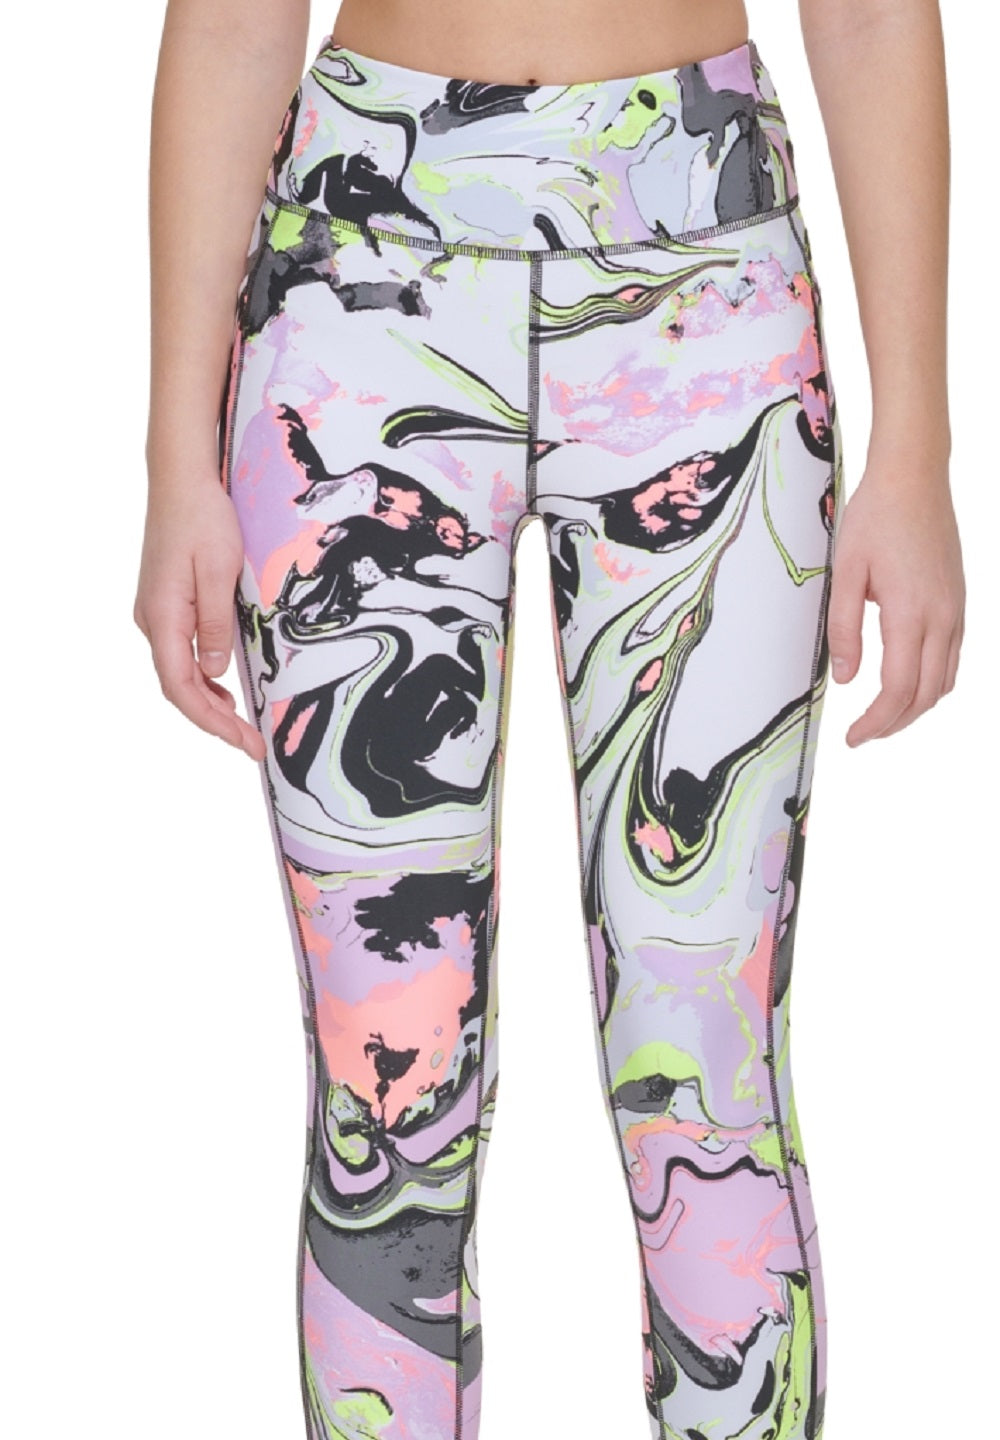 DKNY Women's Printed High Waist 7/8 Leggings Pink Size Large – Steals